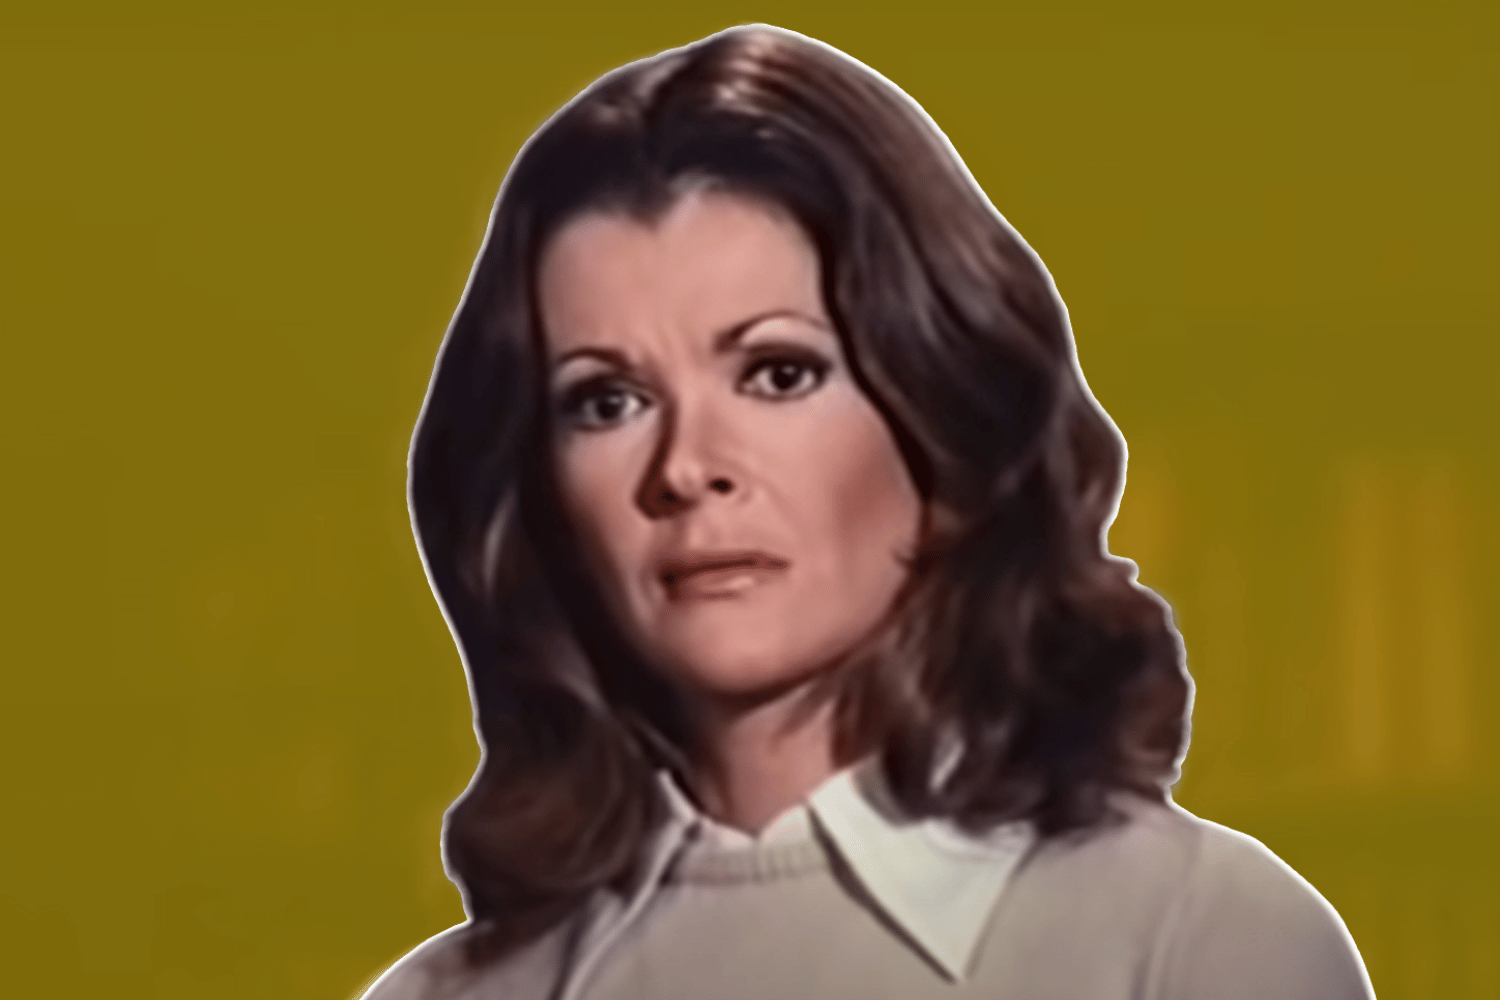 Home for the Holidays Jessica Walter